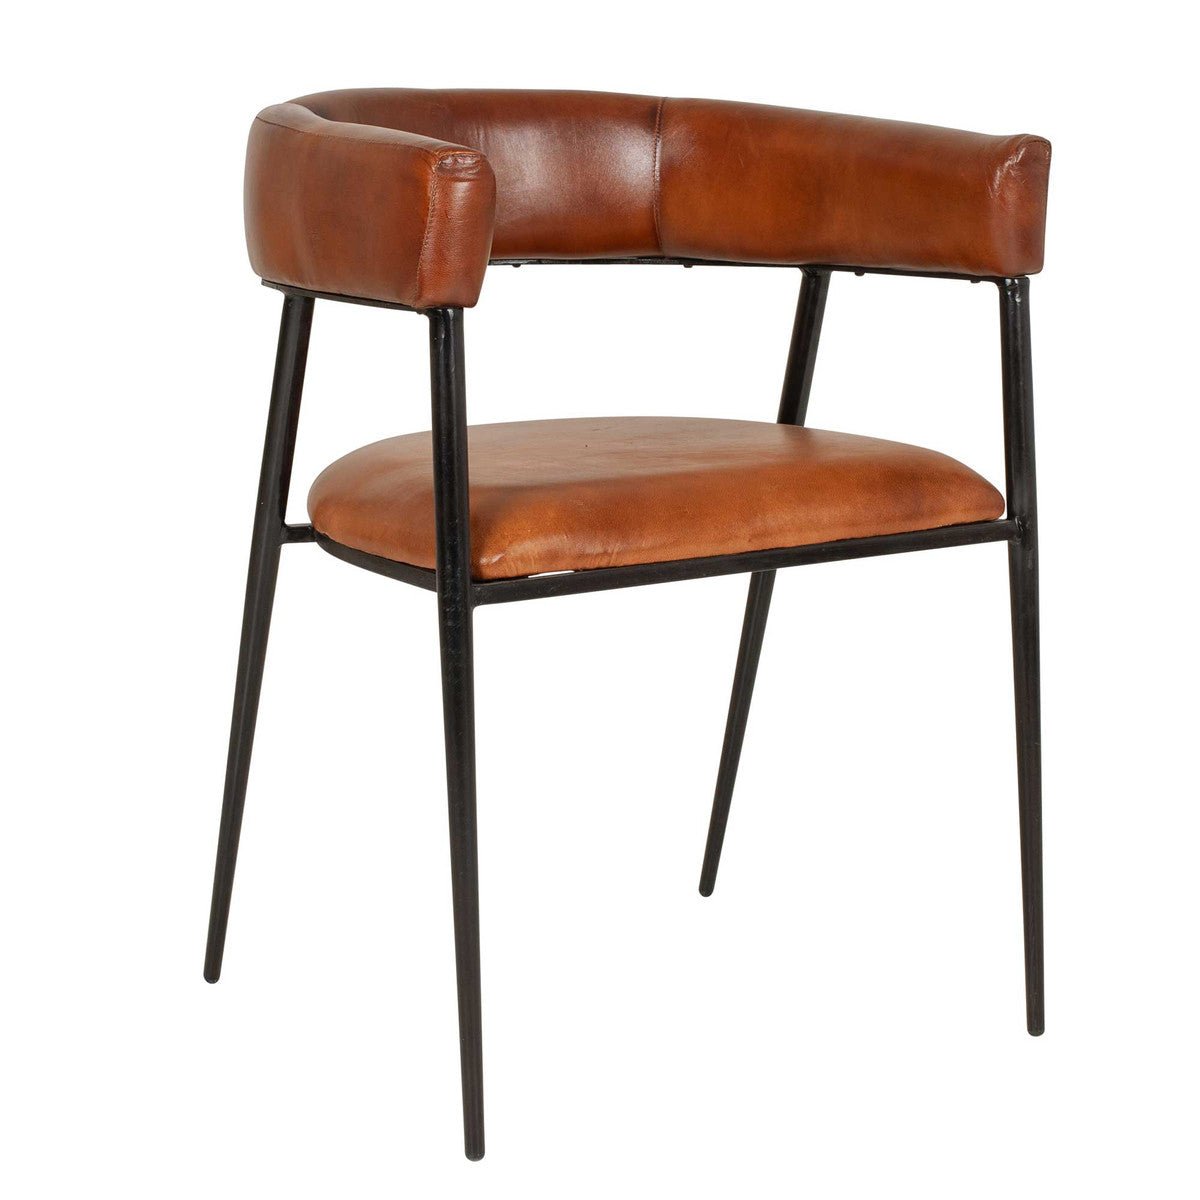 Gregory Iron and Leather Dining Chair - The Furnishery